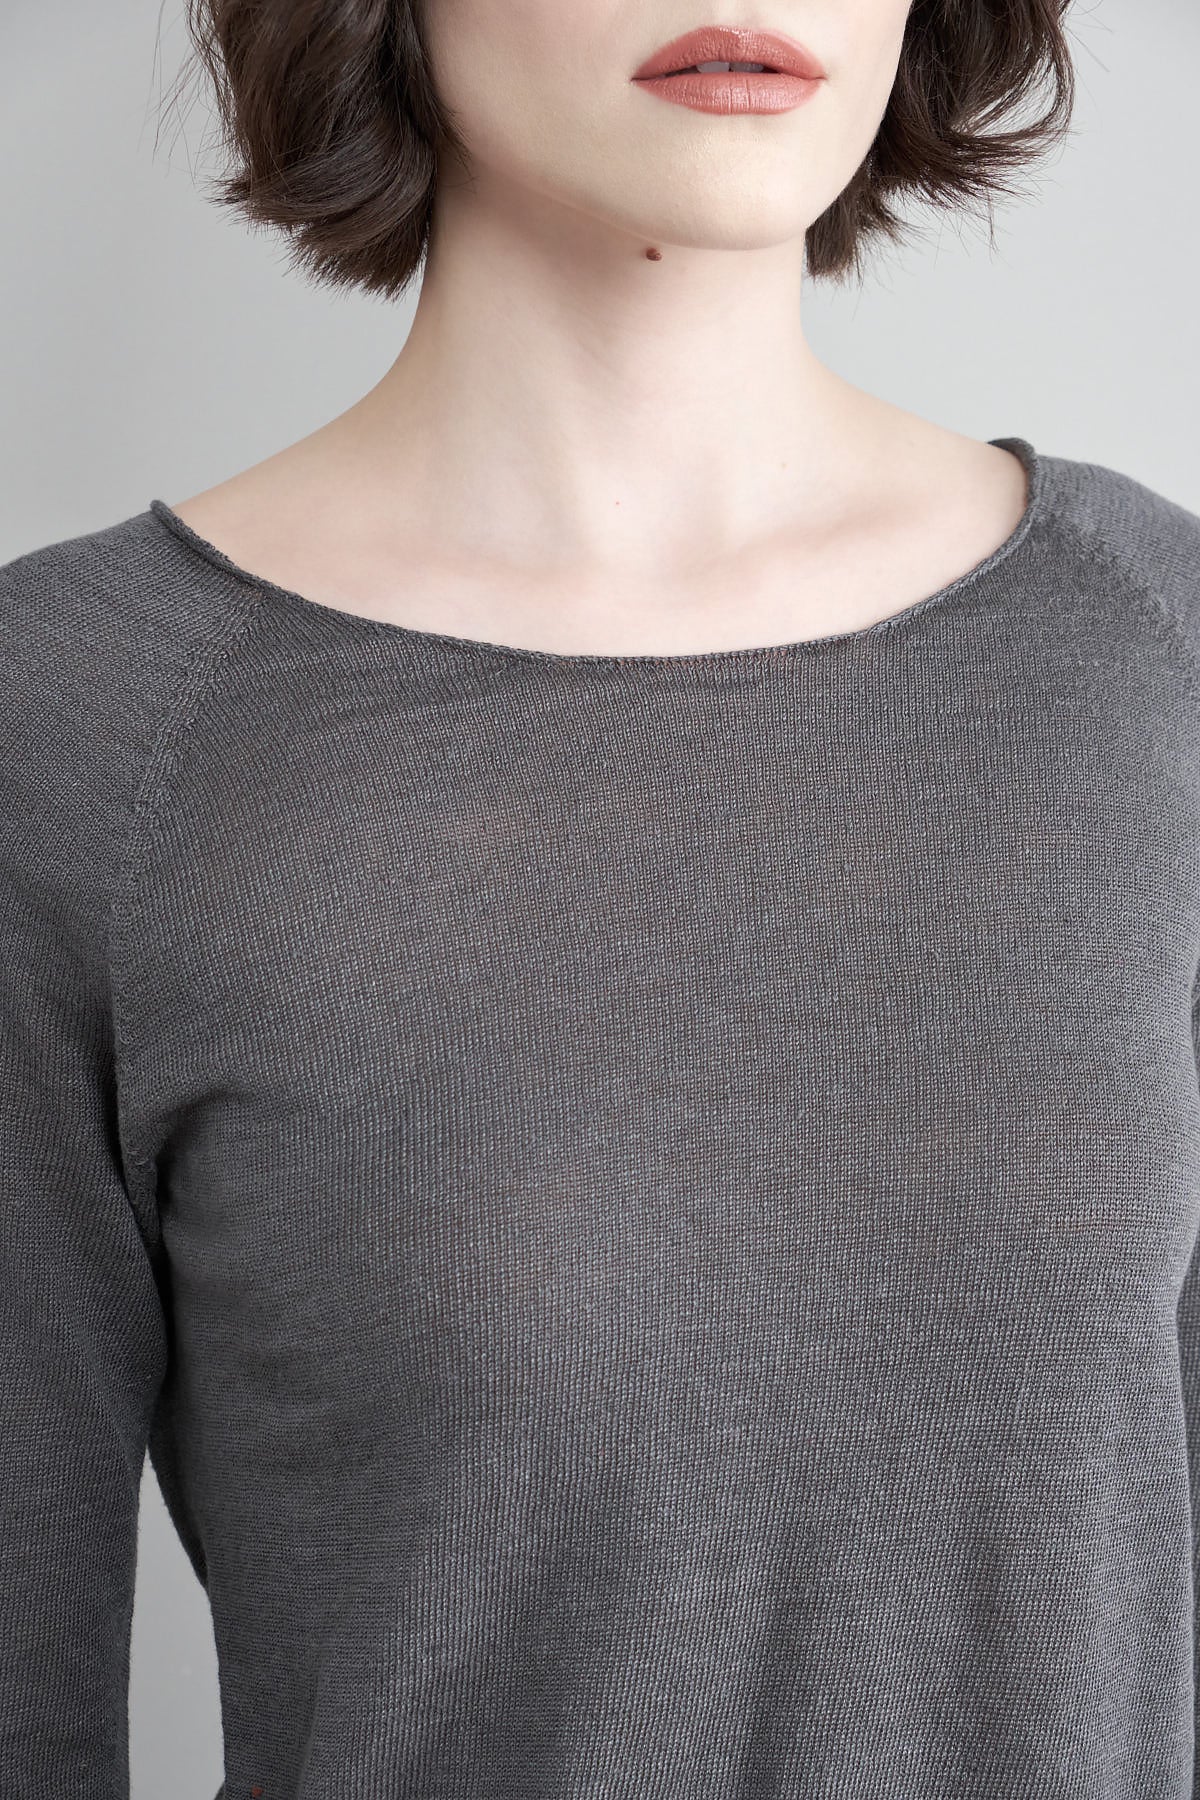 Neckline on Washable Linen Pullover in Blue Gray